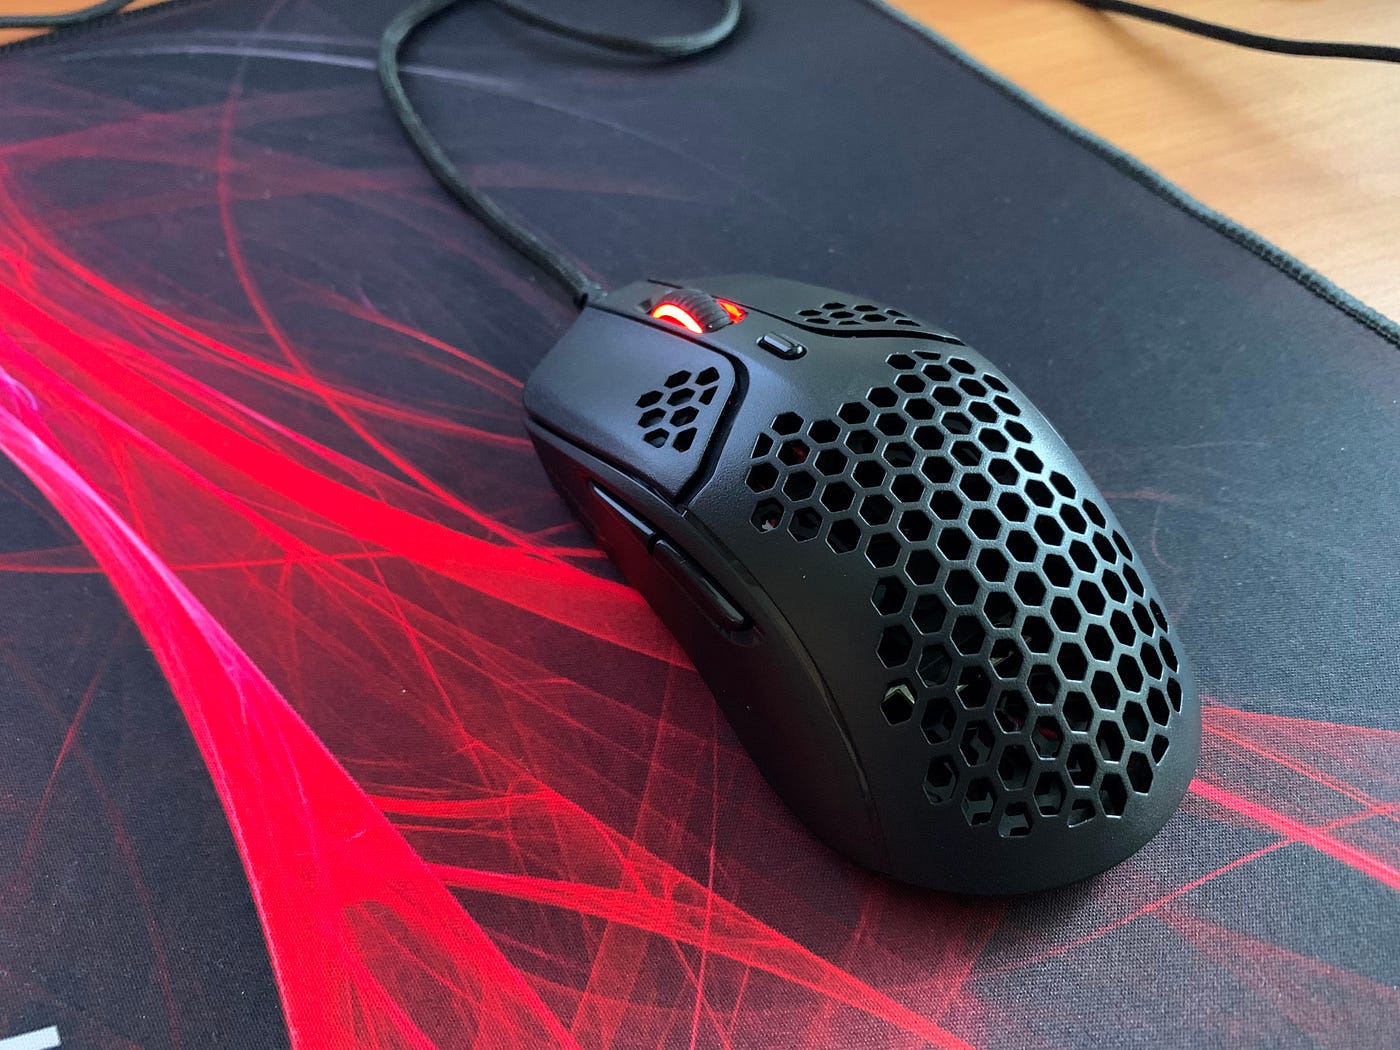 HyperX Pulsefire Haste Review: Testing the Water